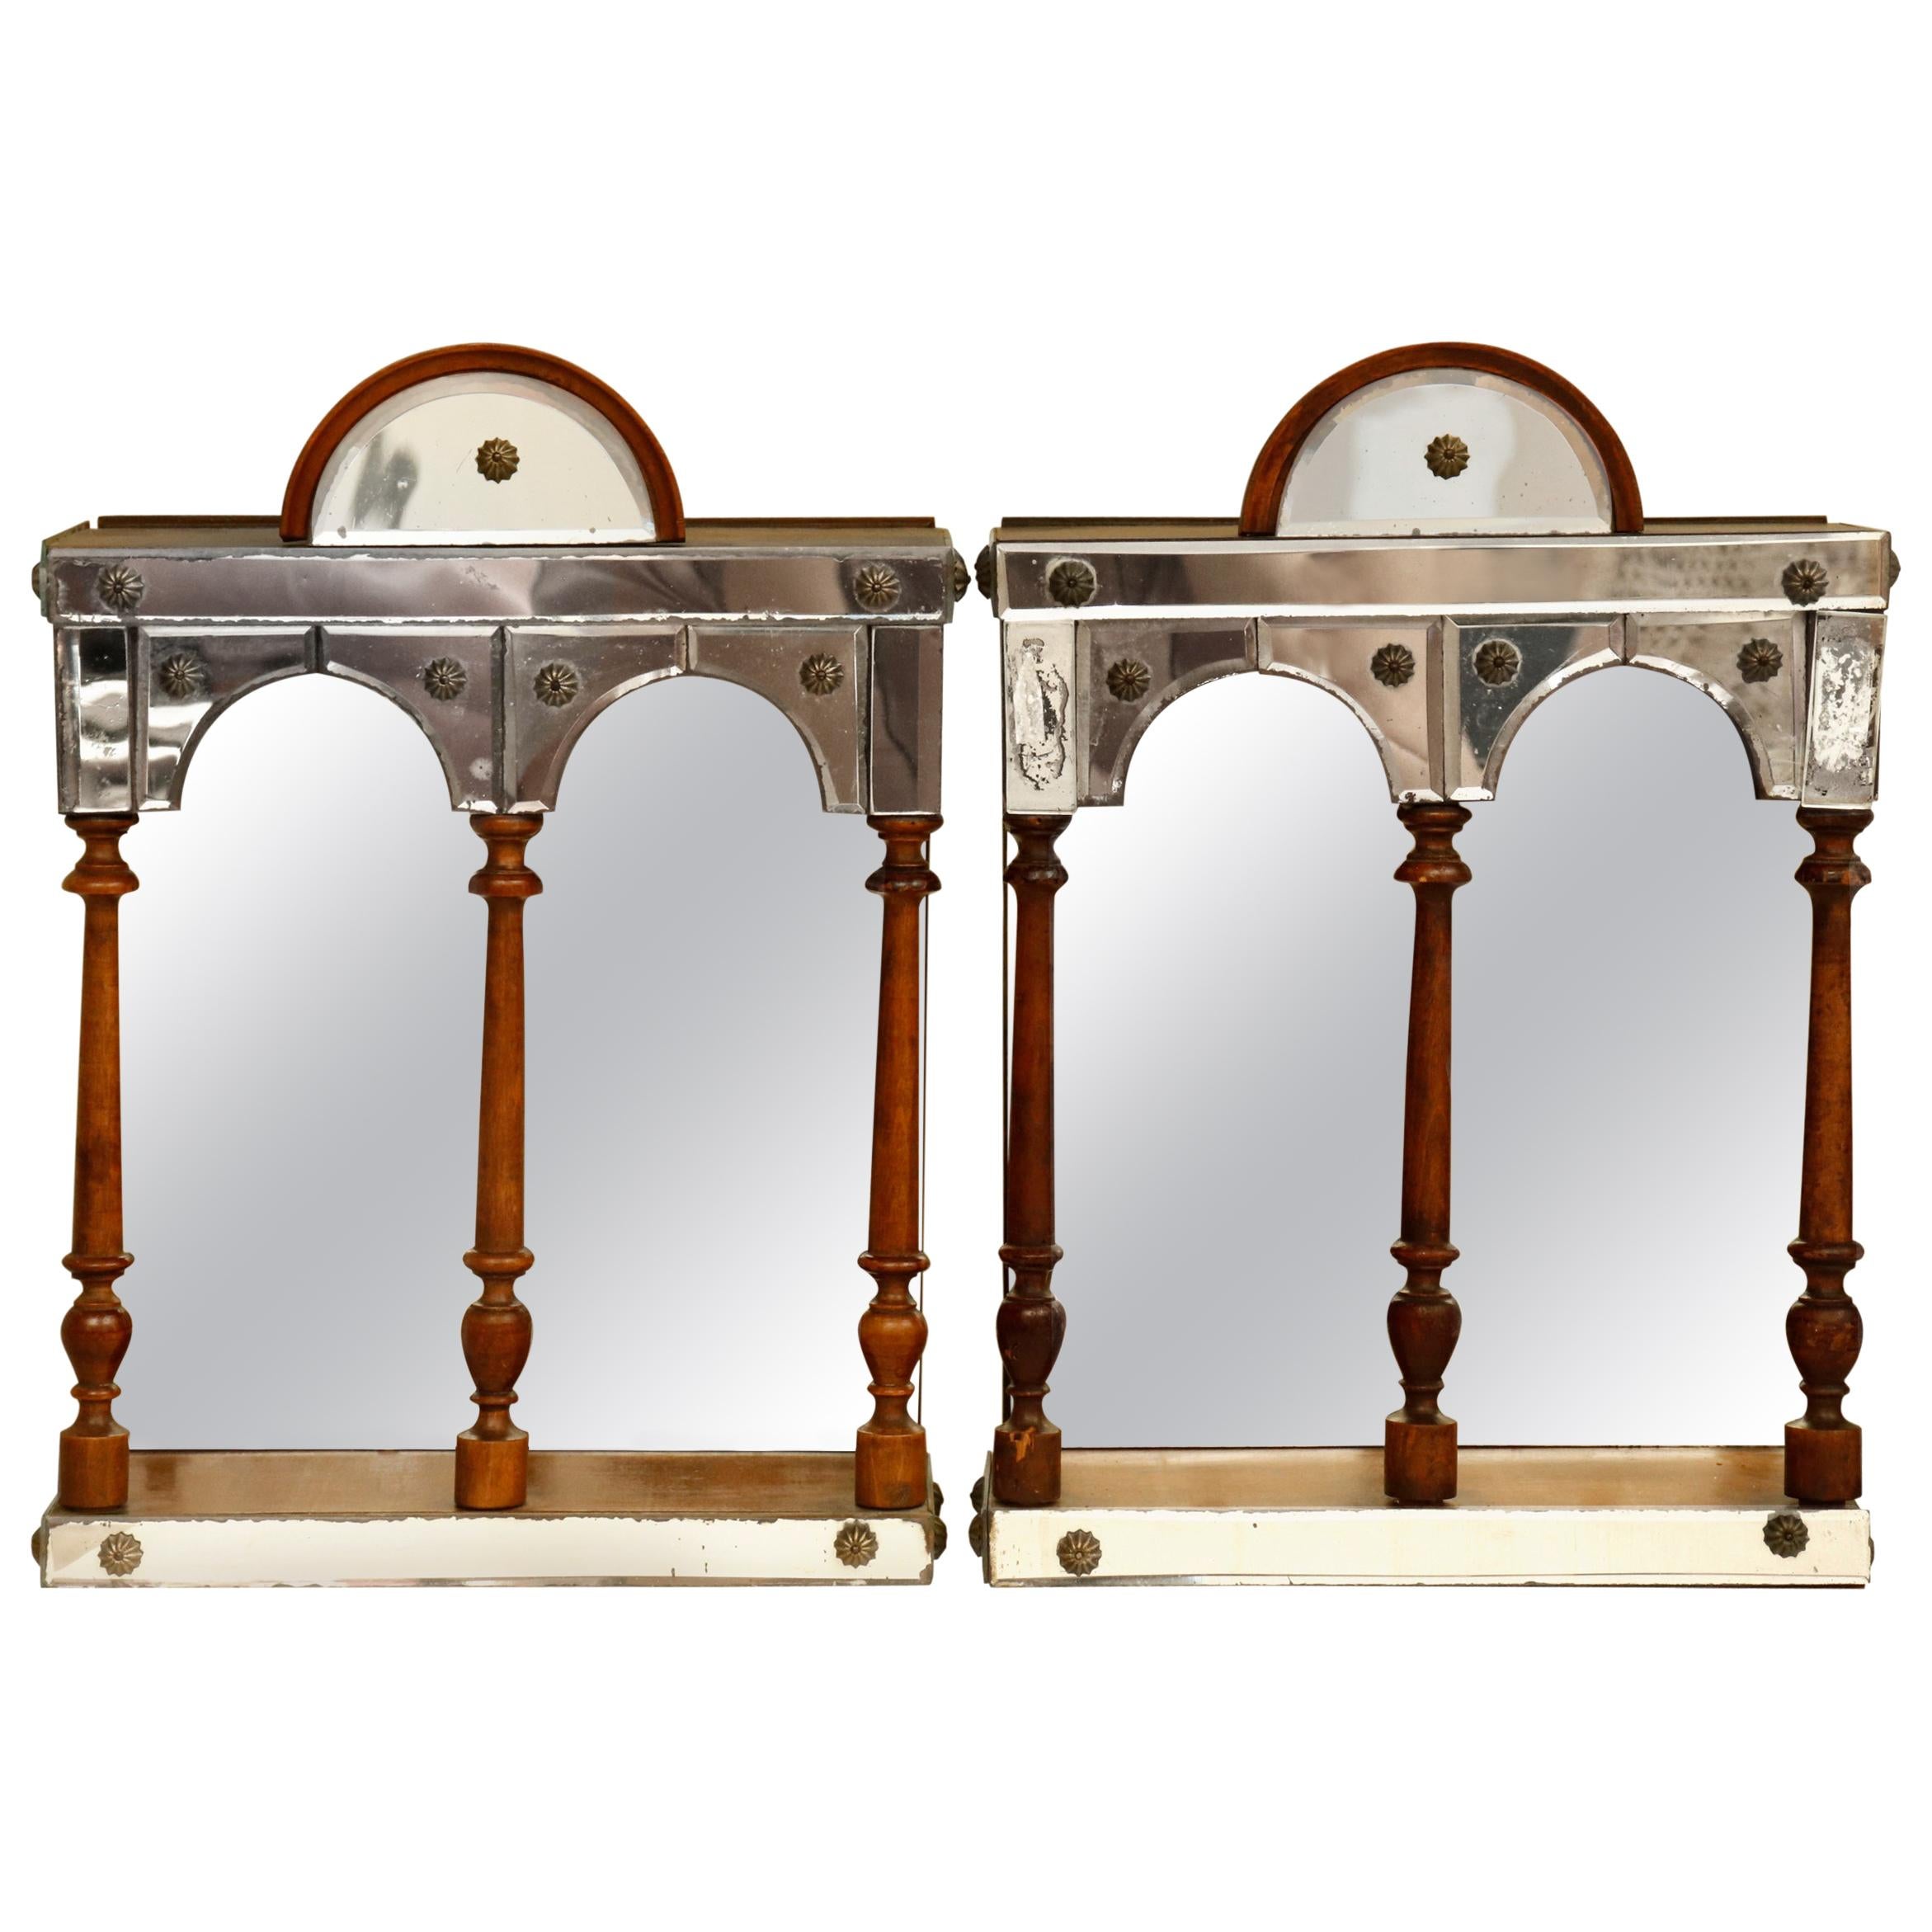 Mirrored Hanging Curio Cabinets For Sale